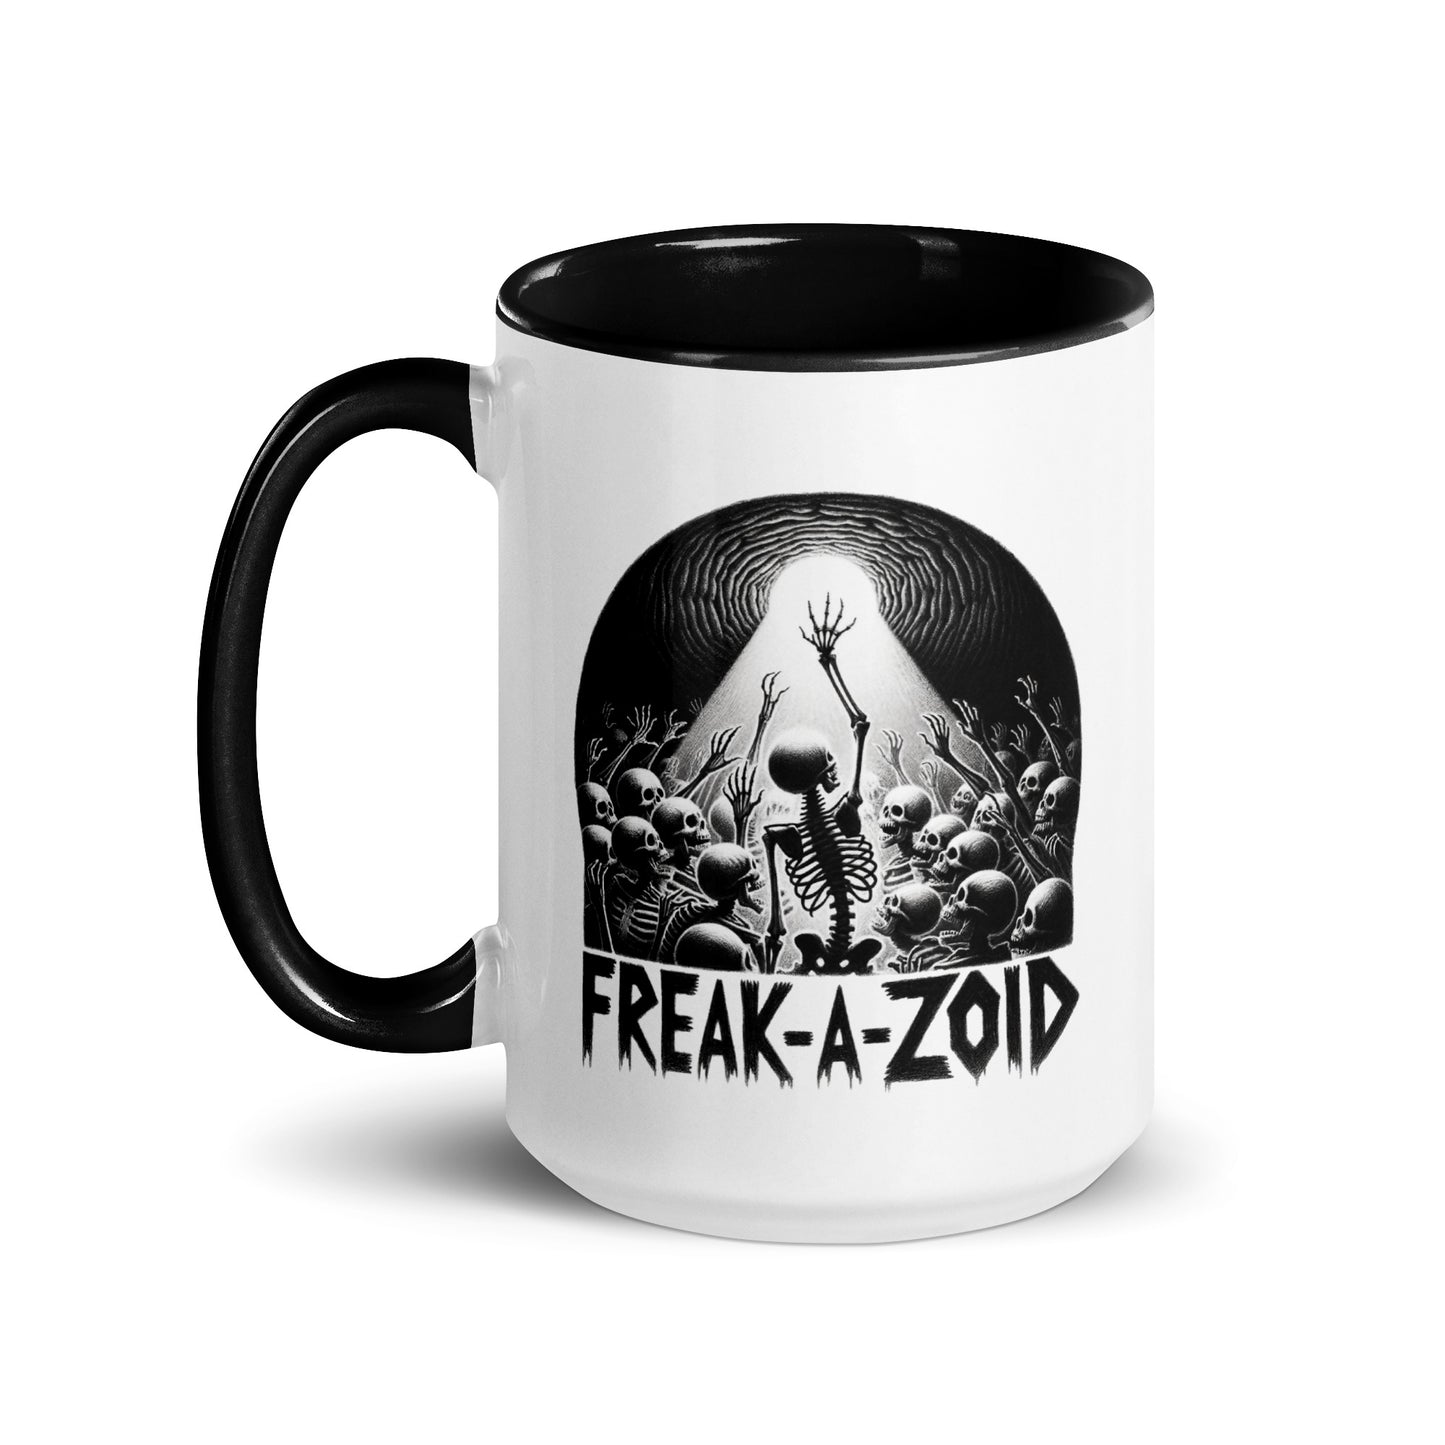 Out Of the Void - Freak-A-Zoid Mug